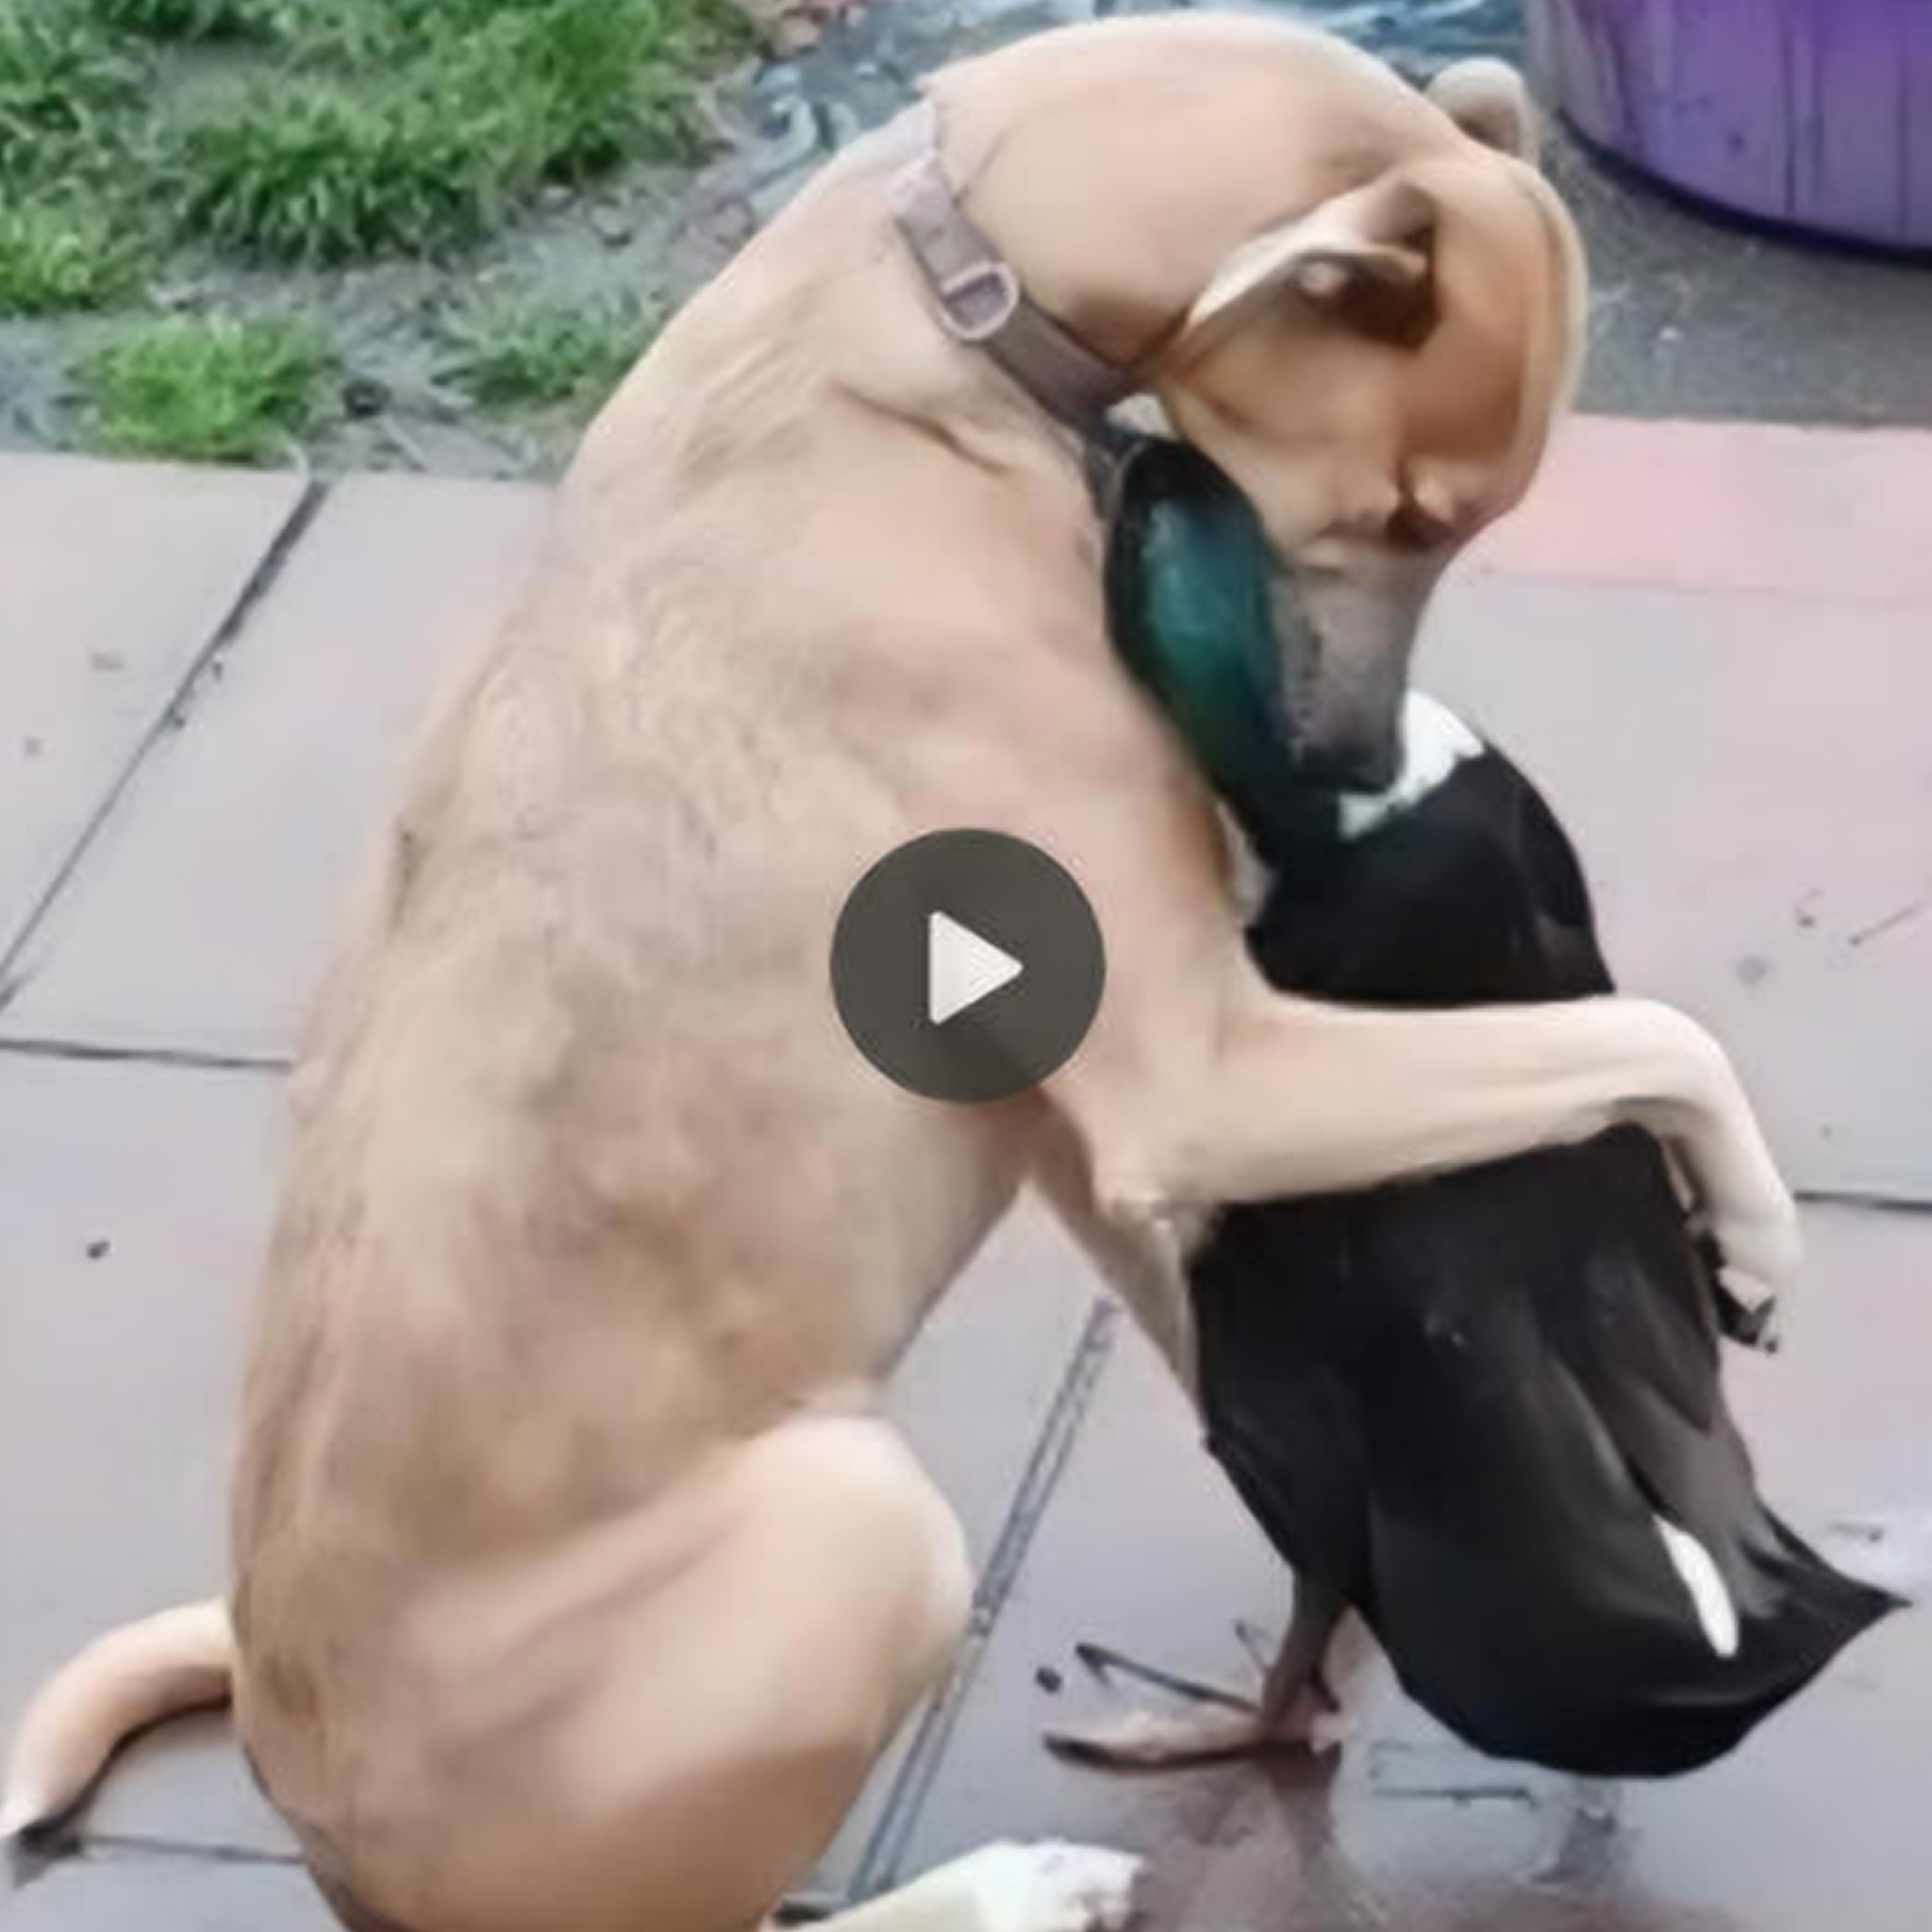 Heartfelt Goodbye: Devoted Dog Shares Tearful Farewell Hug with Duck in Their Final Encounter, Marking the End of 8 Months of Warm Friendship.